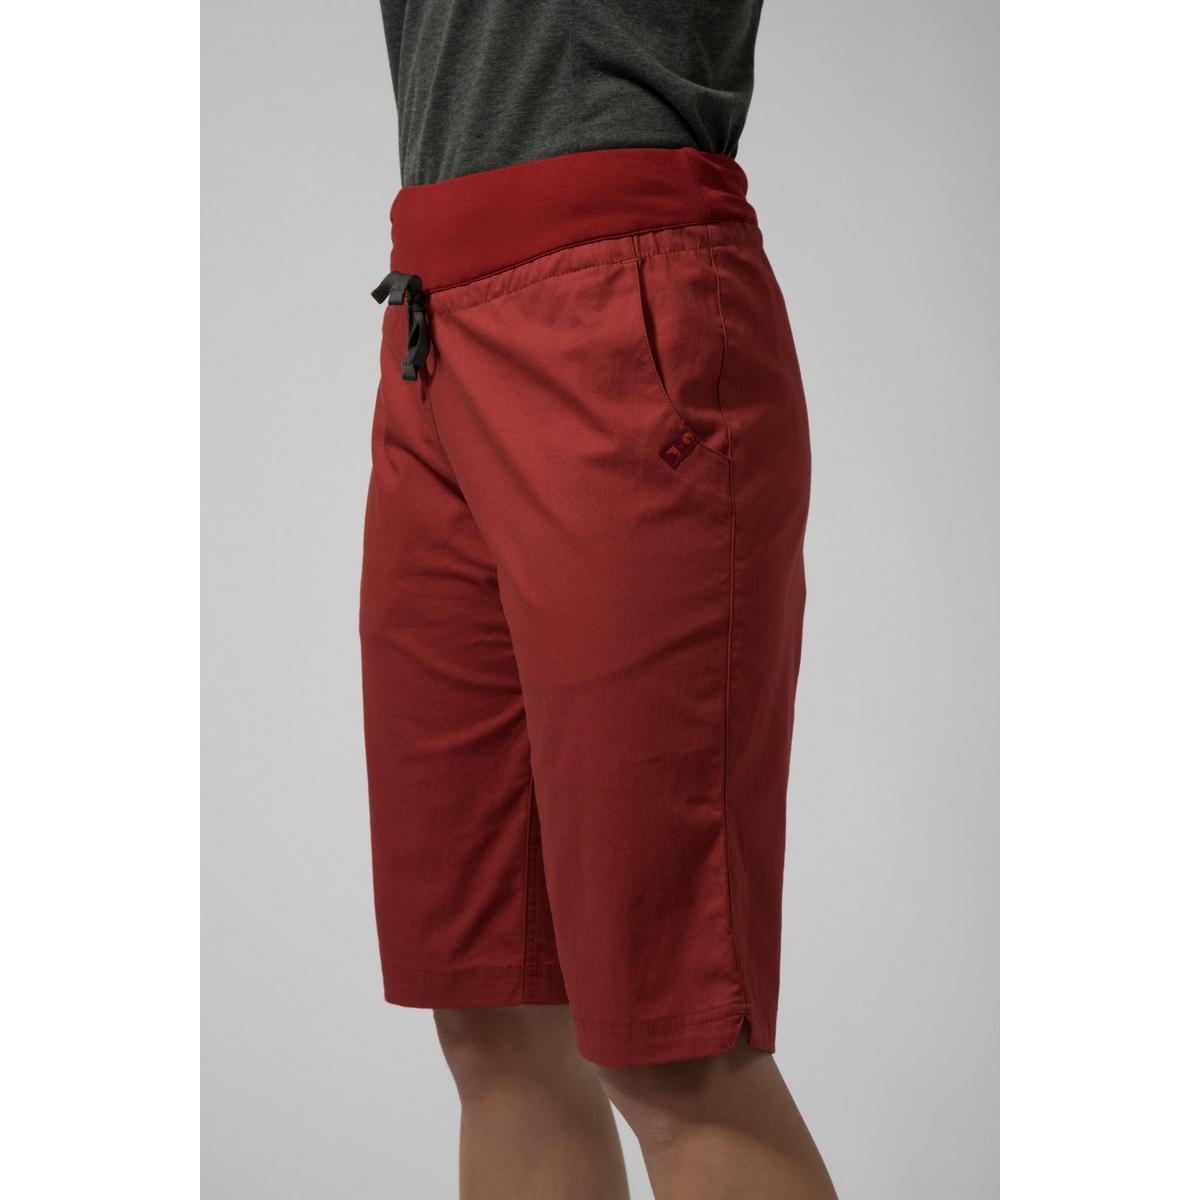 Montane Women's On-Sight Shorts - Red